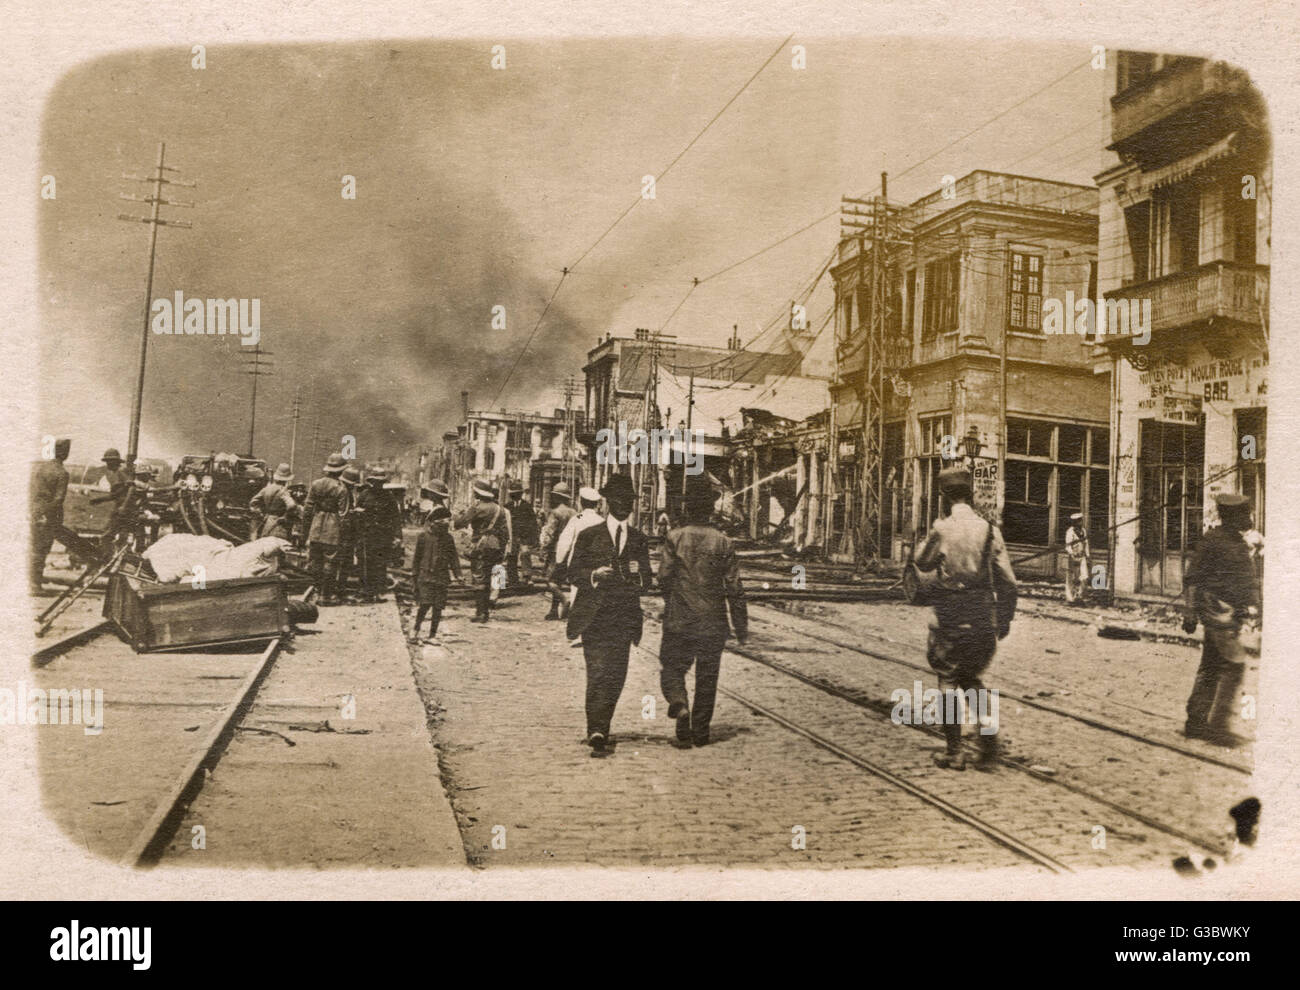 afskaffe Overflod metallisk The Great Fire at Izmir, British Dennis Pump engine in action on the  waterfront - note the railway lines, laid by the French. Date: 1922 Stock  Photo - Alamy